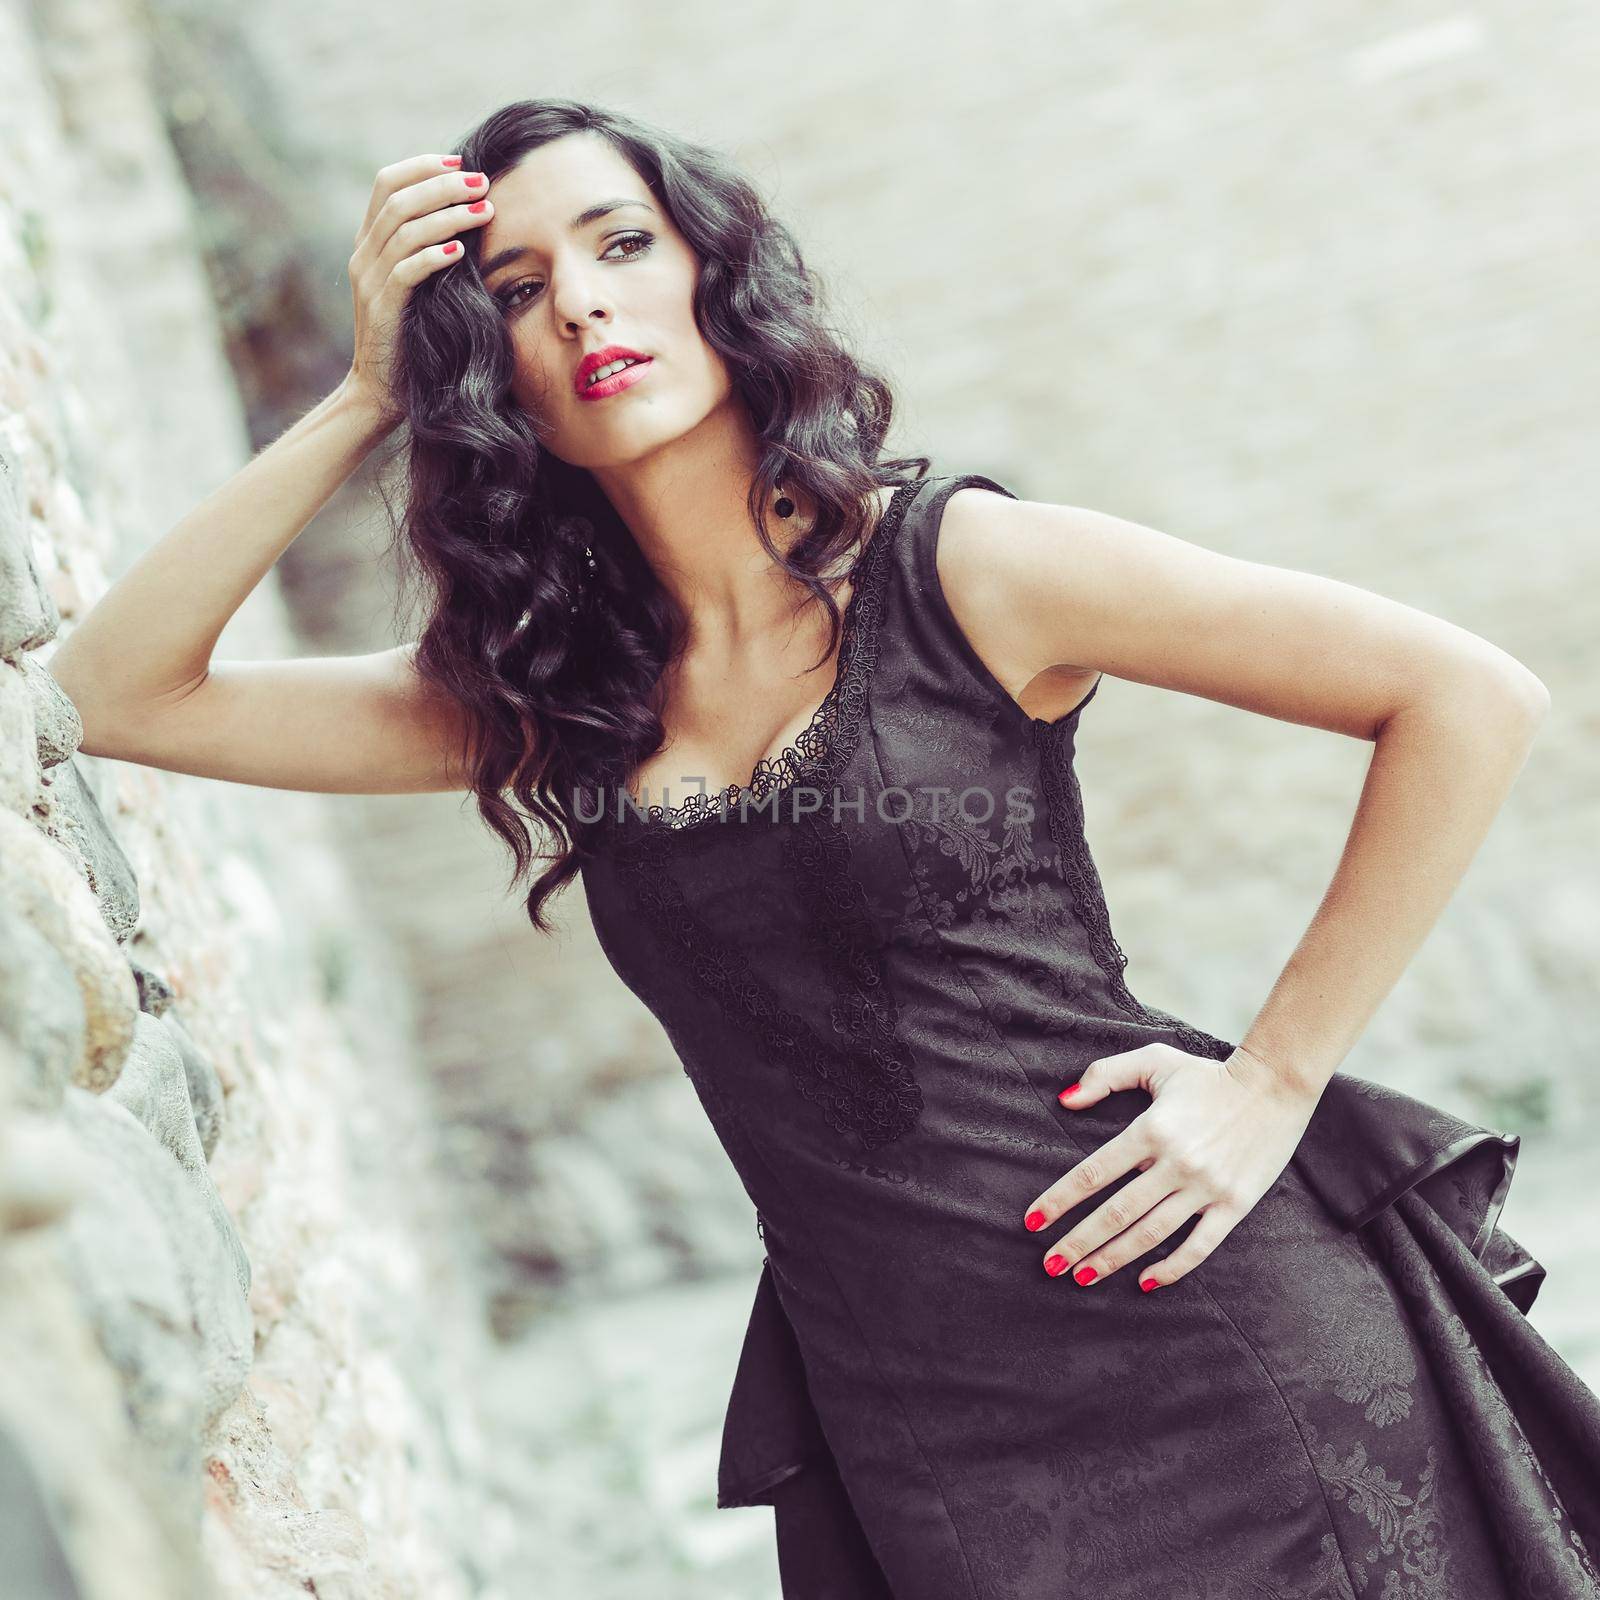 Woman, model of fashion, wearing black dress with curly hair by javiindy